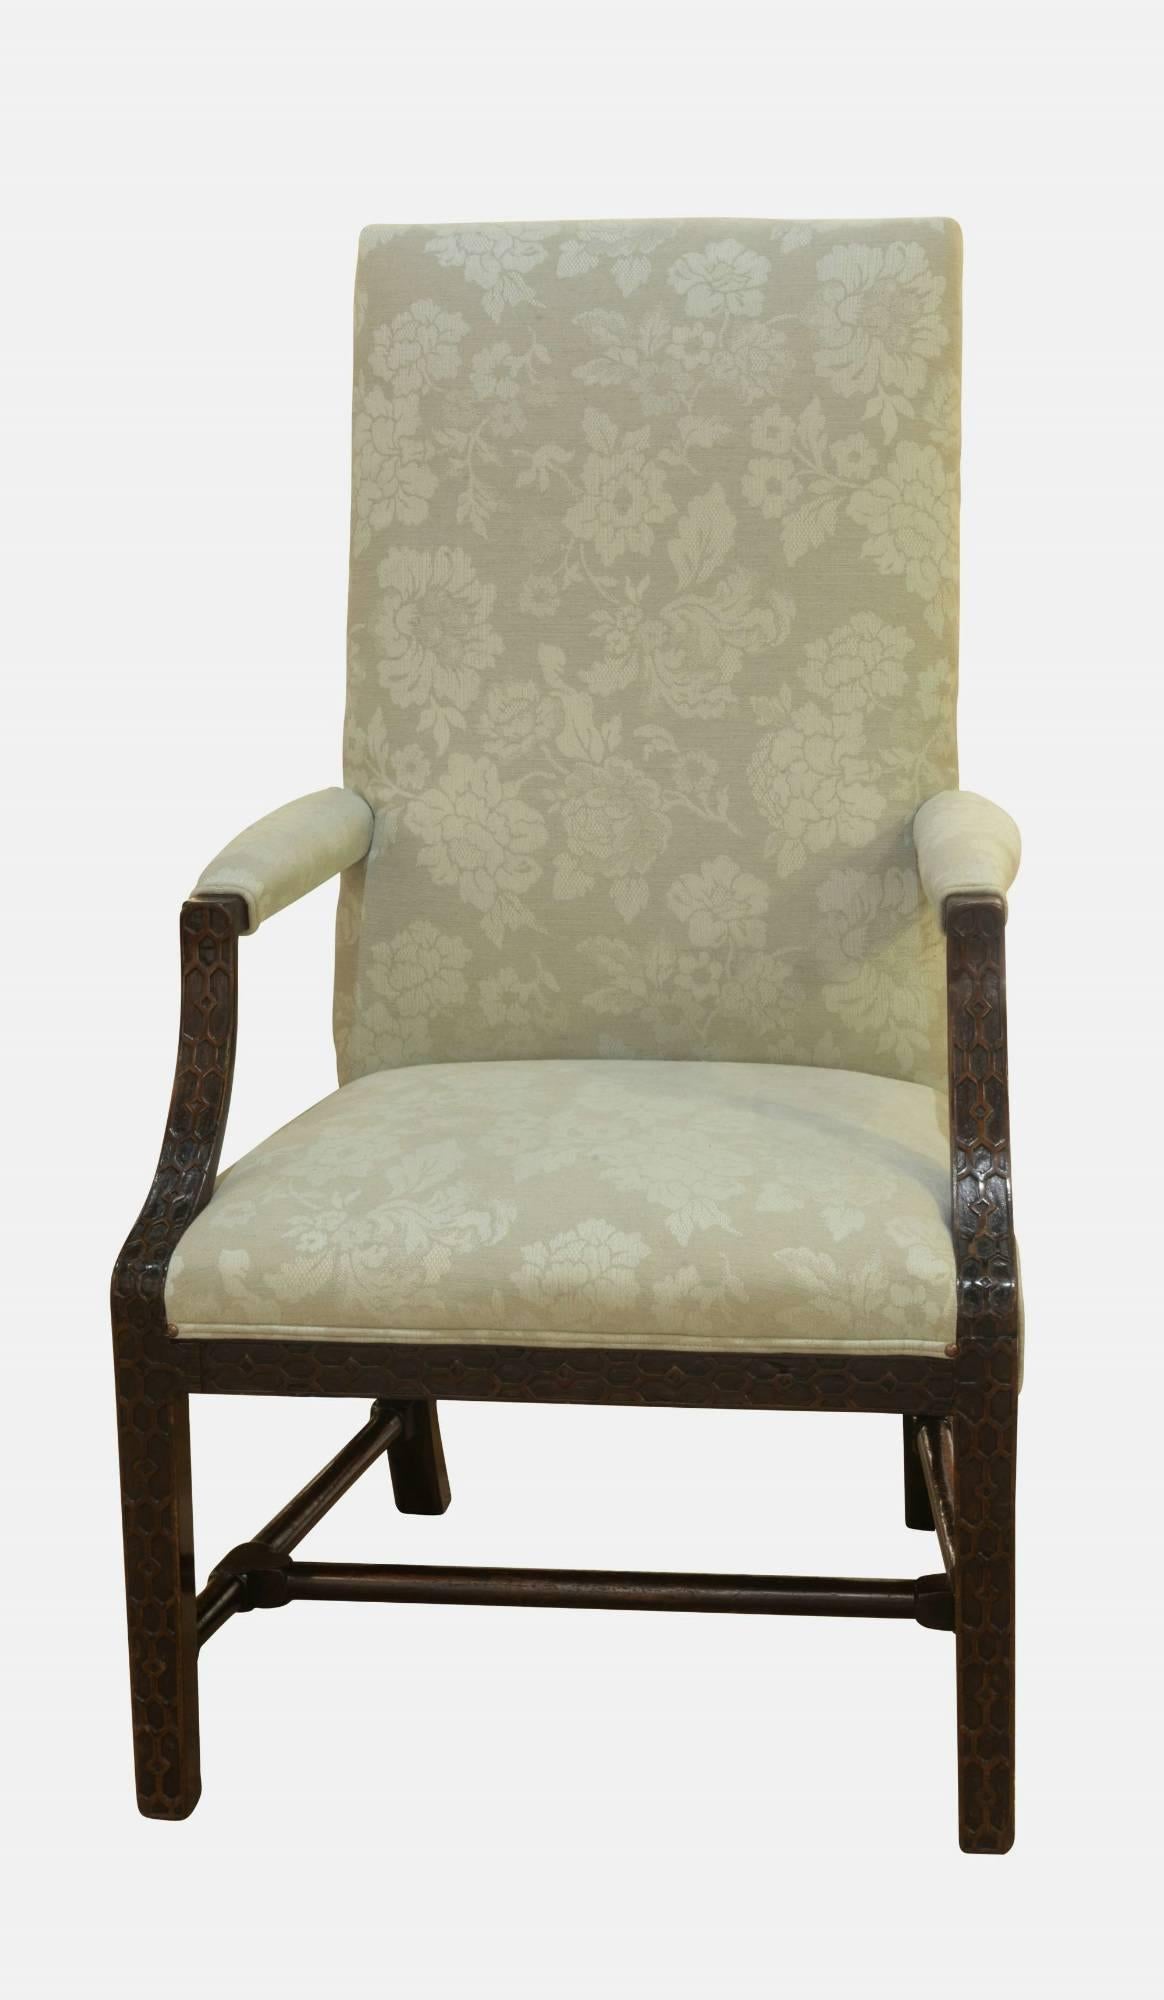 Late 19th century mahogany high backed chair in the Chippendale style.
       